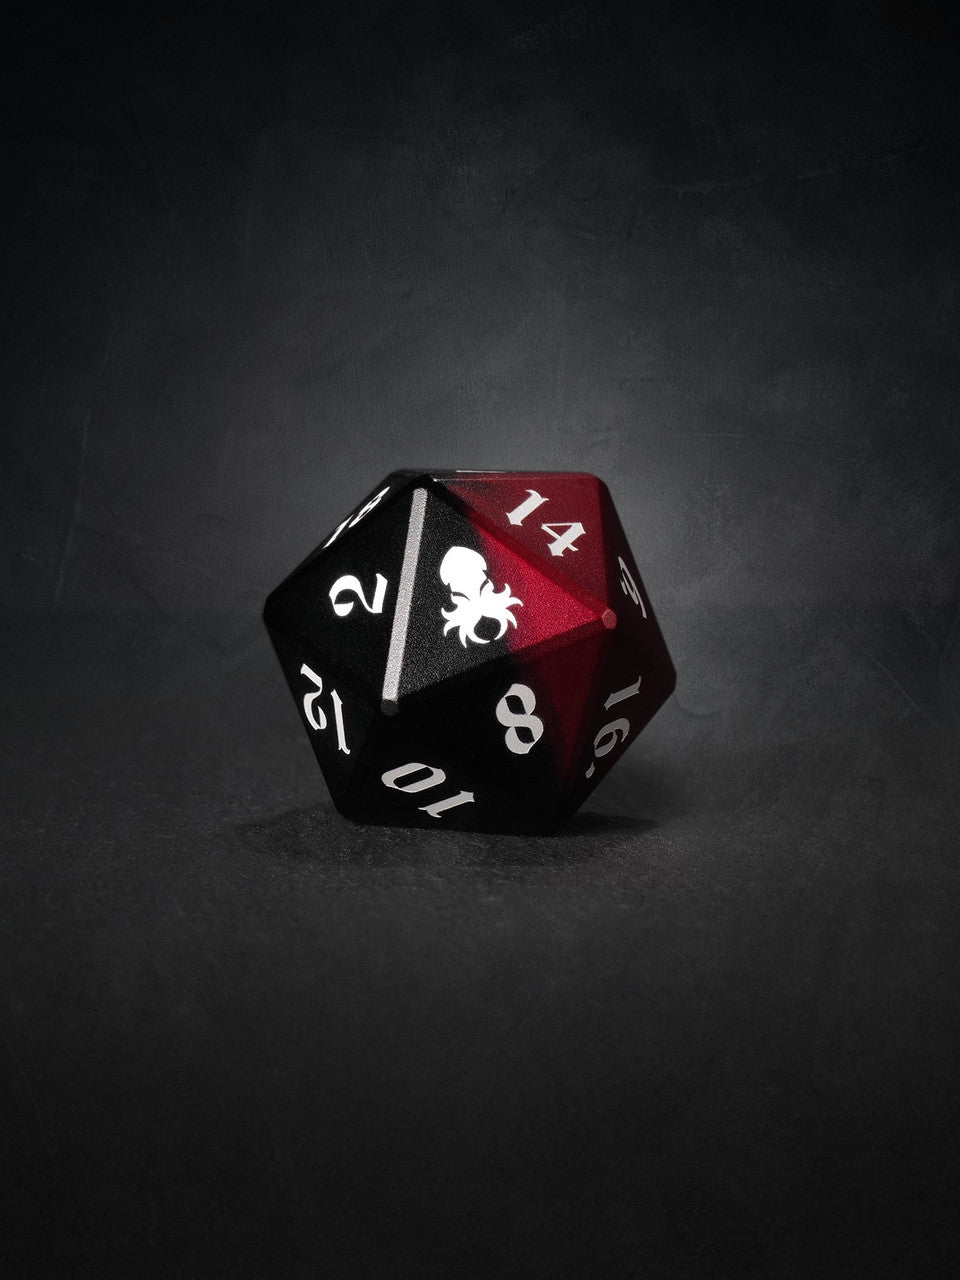 Vulcan: Blood Knight 30mm Black and Red Precision Aluminum Single D20